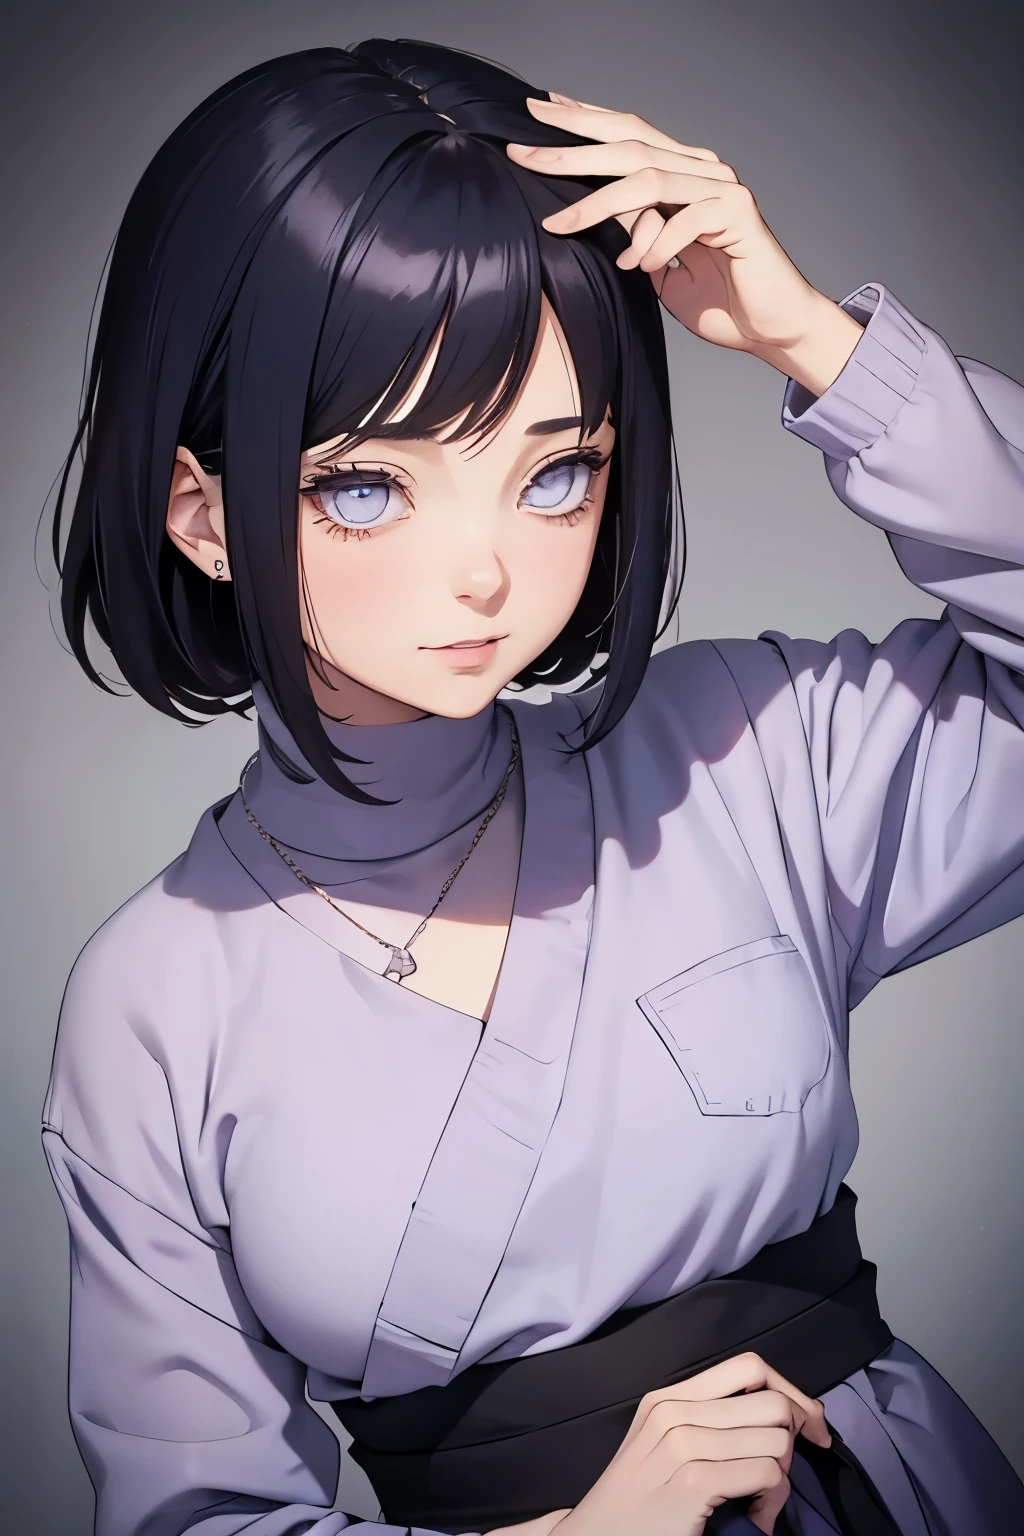 2d, _todler_, {{6 years old}}, RPG character in Naruto alternative universe by Masashi Kishimoto, specially in hyuga clan; Appearance base is Wraith from Apex Legends, with byakugan-soft lilac eyes, kind and soft expression making her look swwet; joyfull, short and dark hair (with shades of dark blue); artwork in modern Japanese animation style, 8k high definition quality, masterpiece, {{high detailed eyes}}, grain filter, high resolution, extremely detailed, portrait, Anatomically accurate, girly reddish cheeks; (highest quality:1.3), {{dutch angle}}, {{smiling todler}}, {{inocent}} ((byakugan)), ((young))